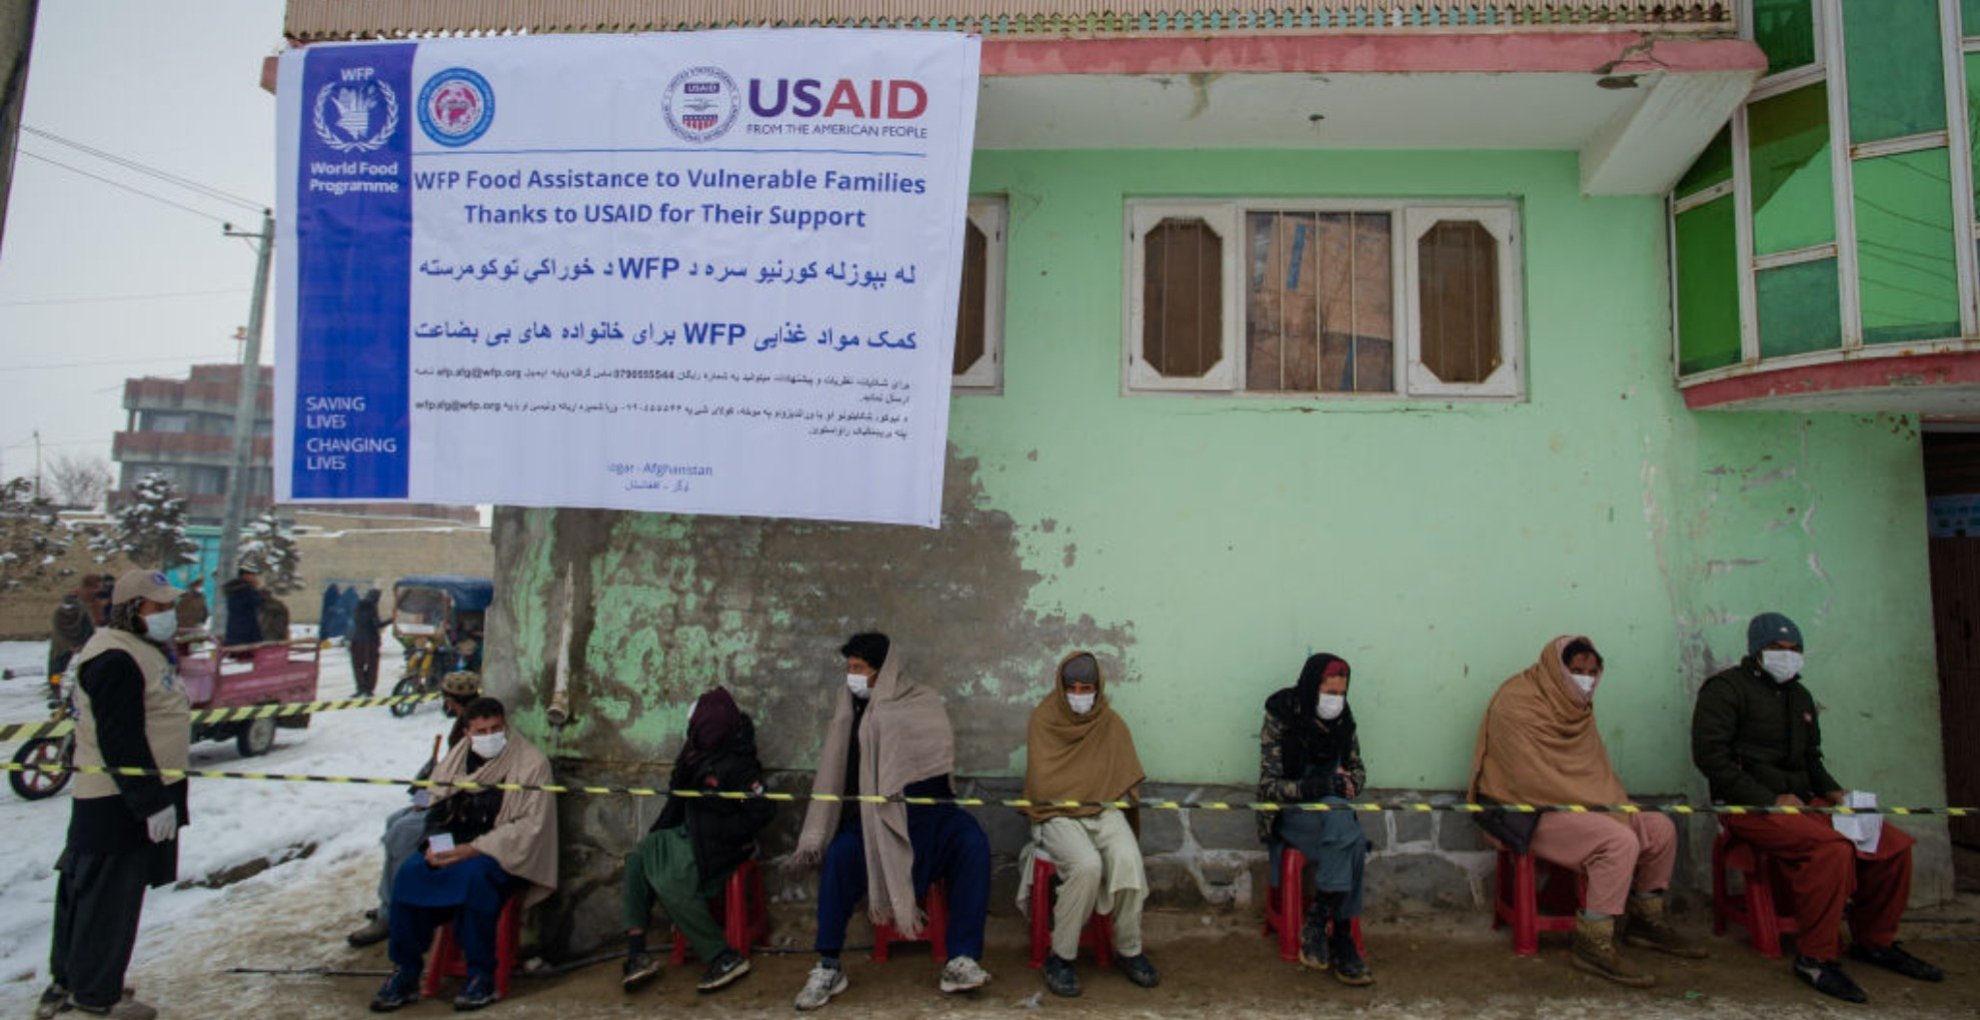 In January, the United Nations and U.S. Agency for International Development (USAID) supplied food to 400 families in Afghanistan's Logar province.